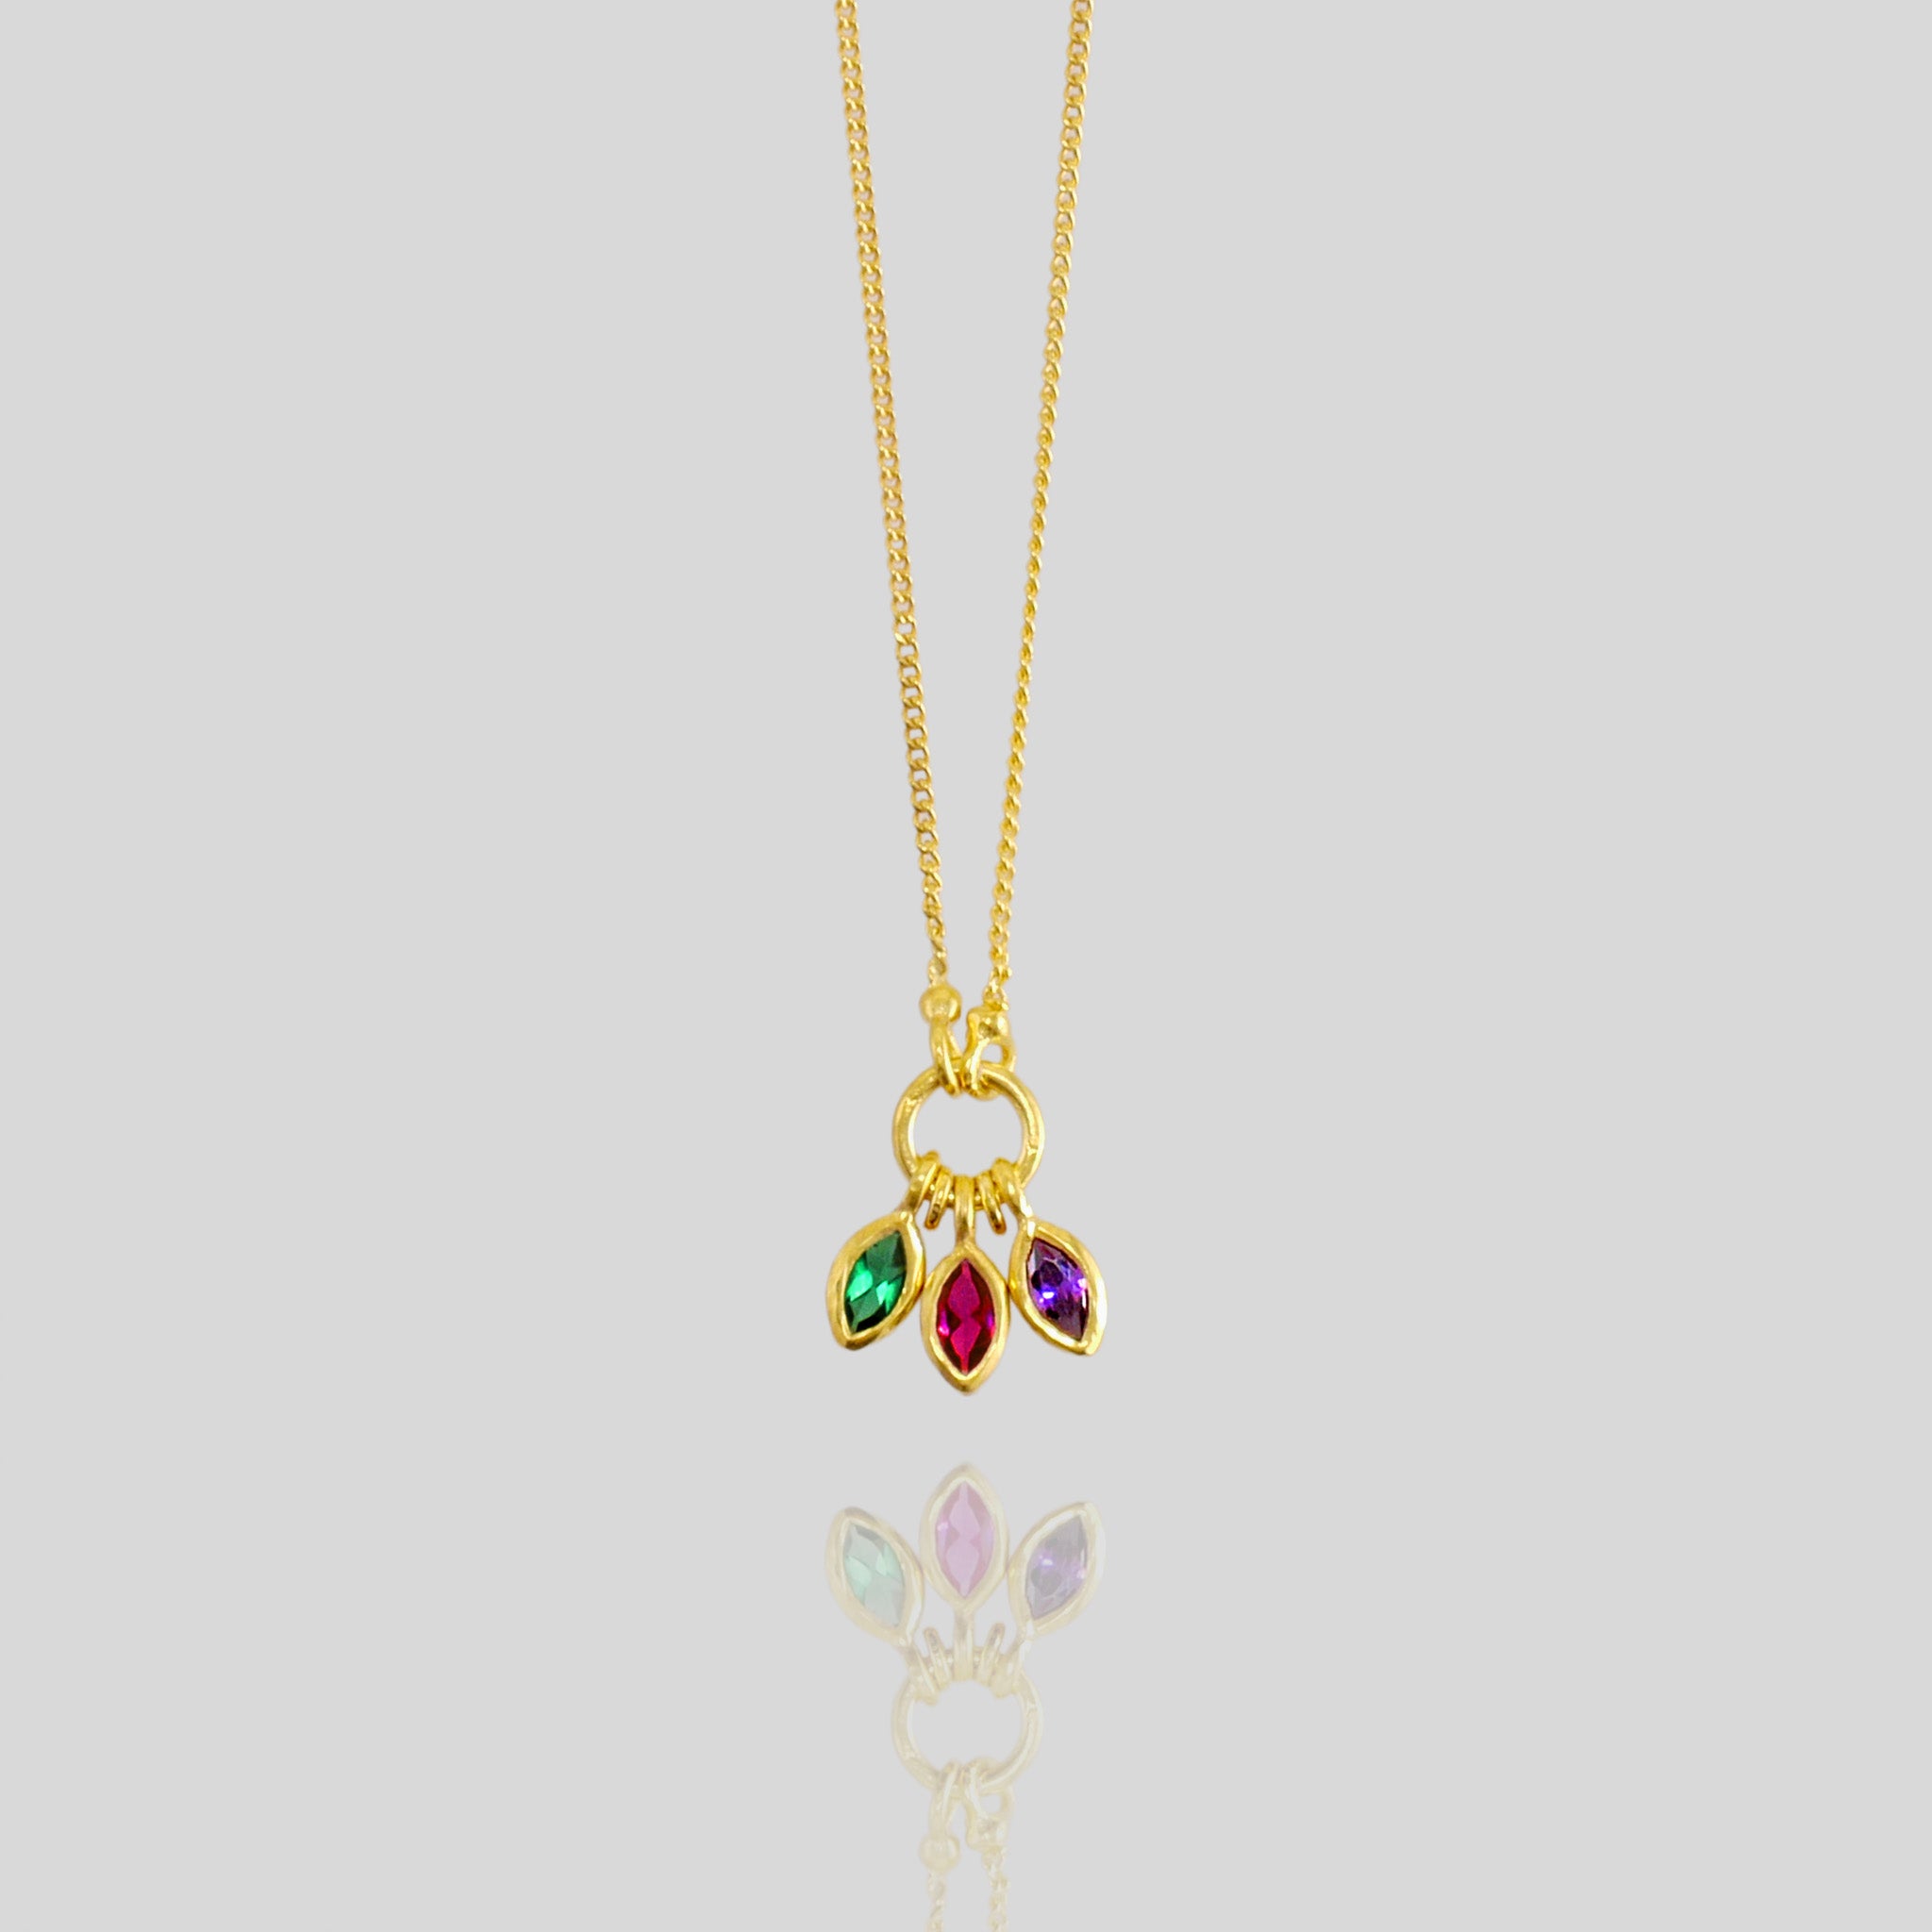 Close up of a Gold marquee pendant with three expertly cut gemstones - ruby, emerald, and sapphire - elegantly intertwined, showcasing a blend of colors and radiance.